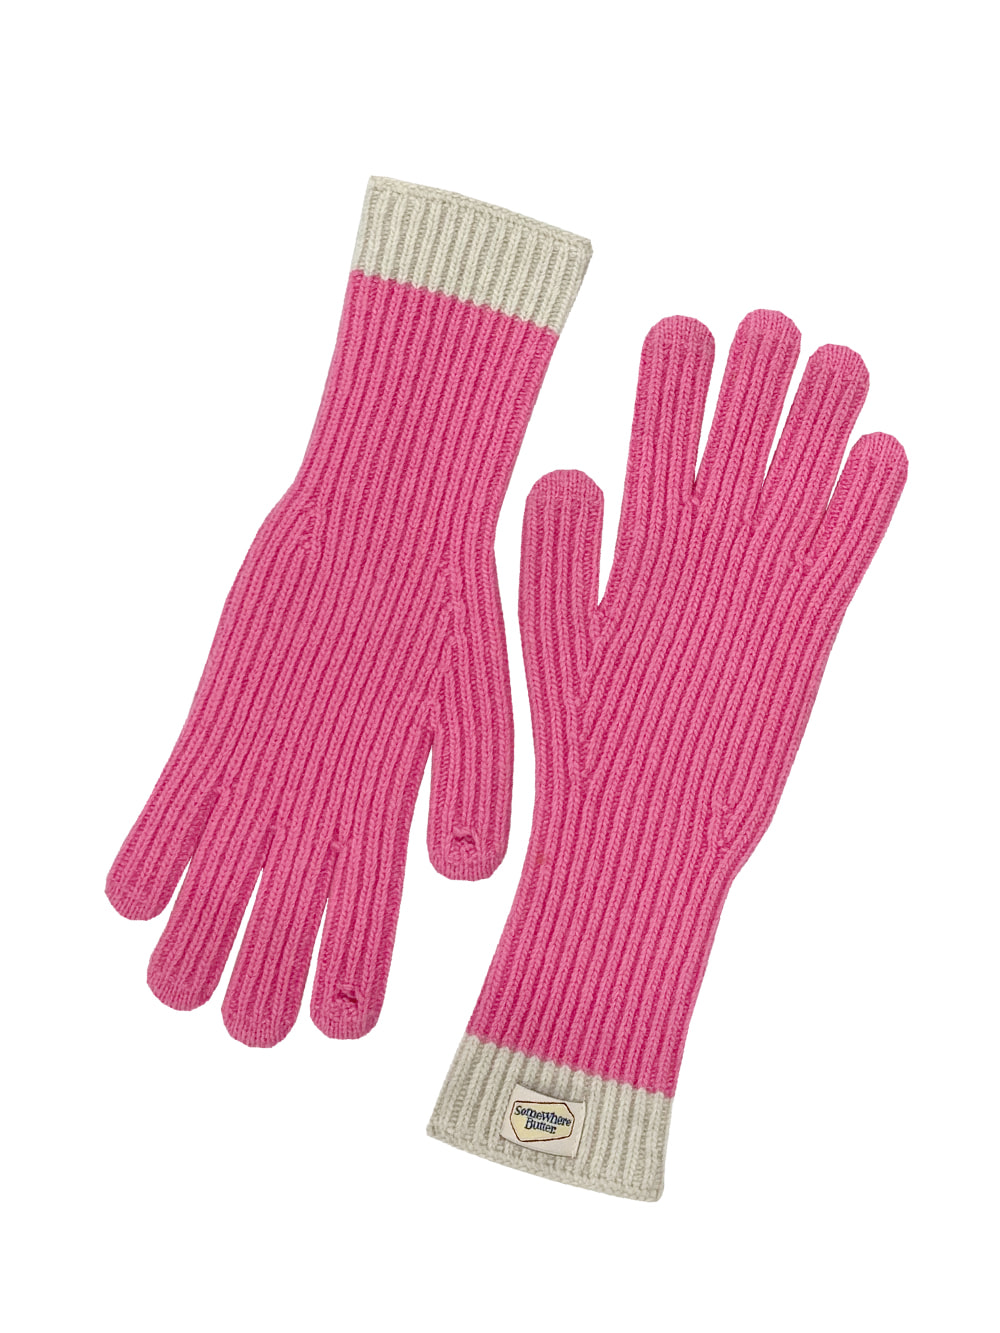 [preview] butter wool gloves - pink